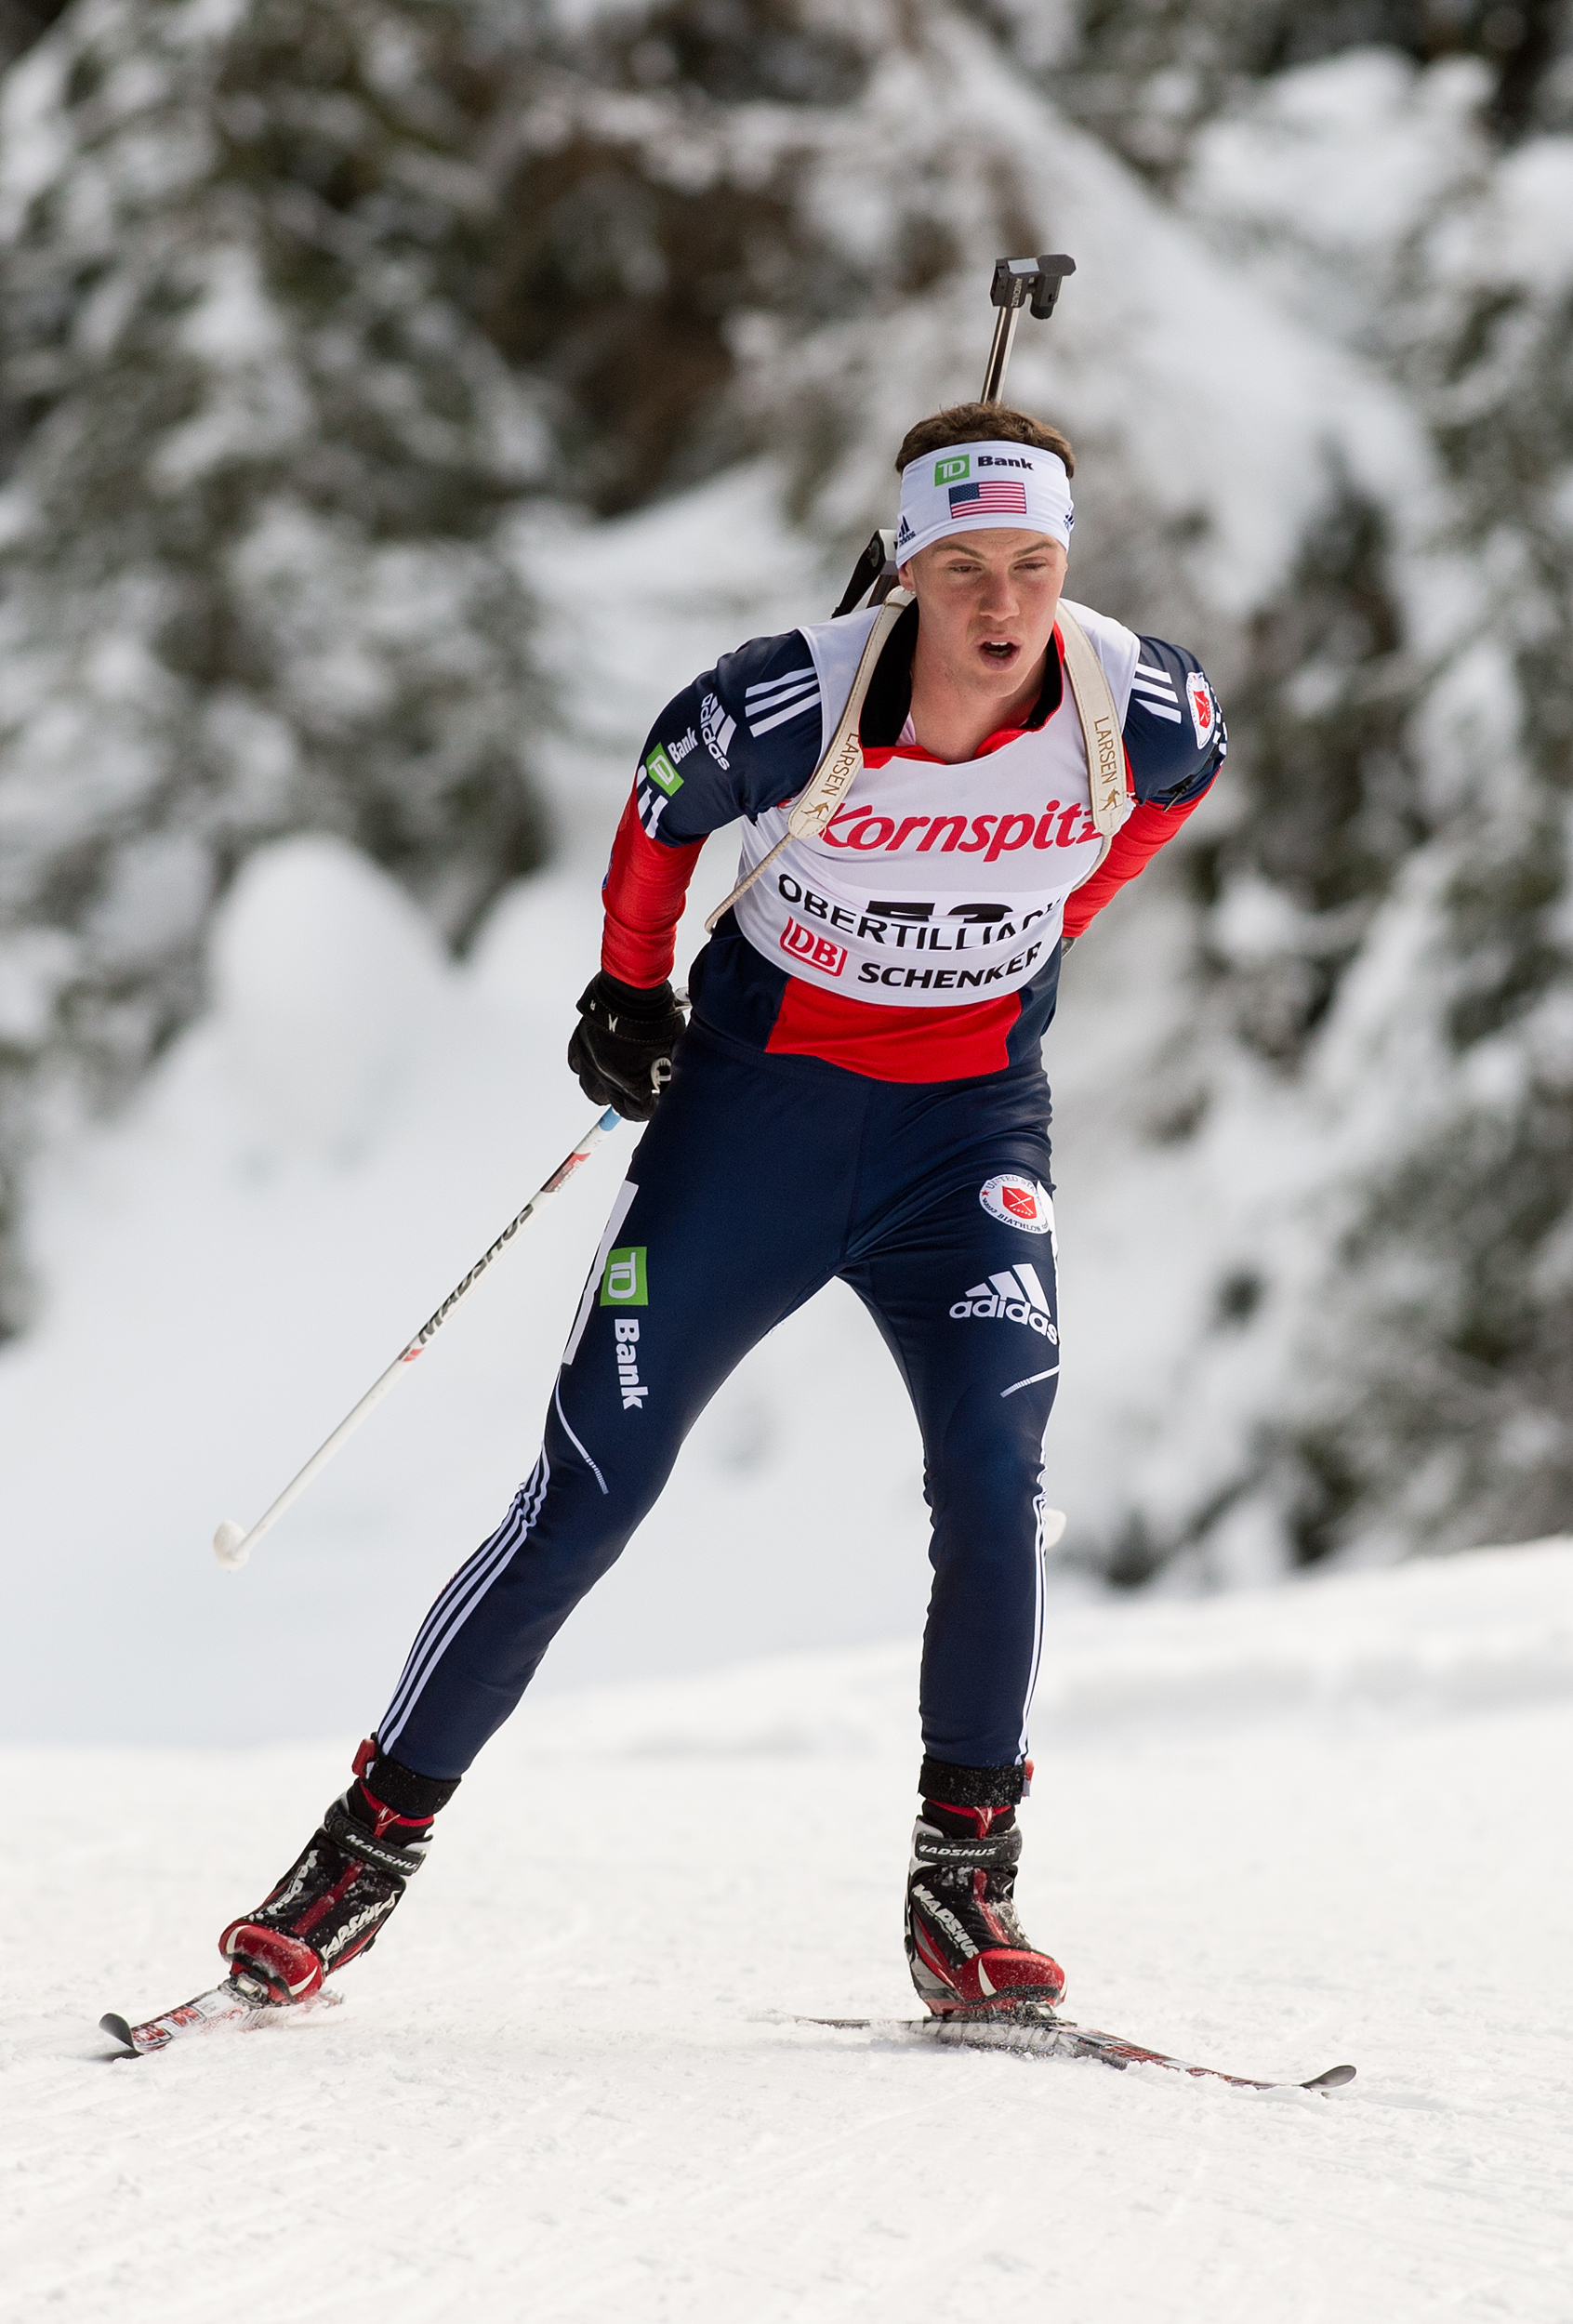 Casey Smith (USA) en route to 37th place in the junior men's individual at World Junior Championships in Obertilliach, Austria, in 2013. He had his career-best finish of 23rd place in the pursuit there. (Photo: US Biathlon/NordicFocus.com)